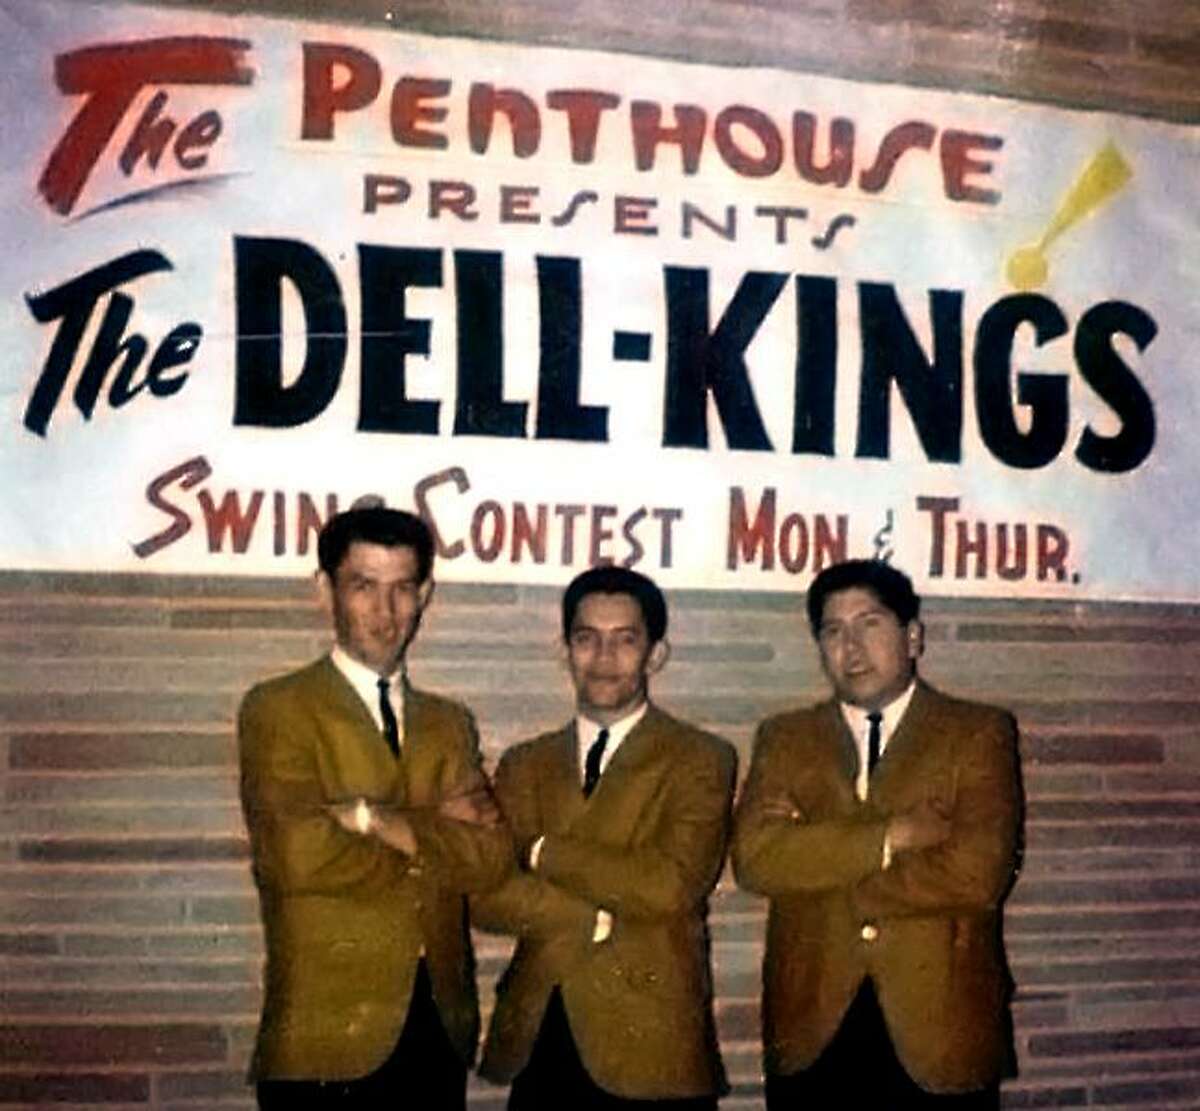 The legendary Dell-Kings circa 1963 in South Gate, California. The legendary San Antonio Chicano R&B band included singer-guitarist Victor Lopez (from left) and saxophonists Cleto Escobedo and Frank Rodarte. Rodarte led the Las Vegas style act that later became Los Blues with bluesman Randy Garibay.